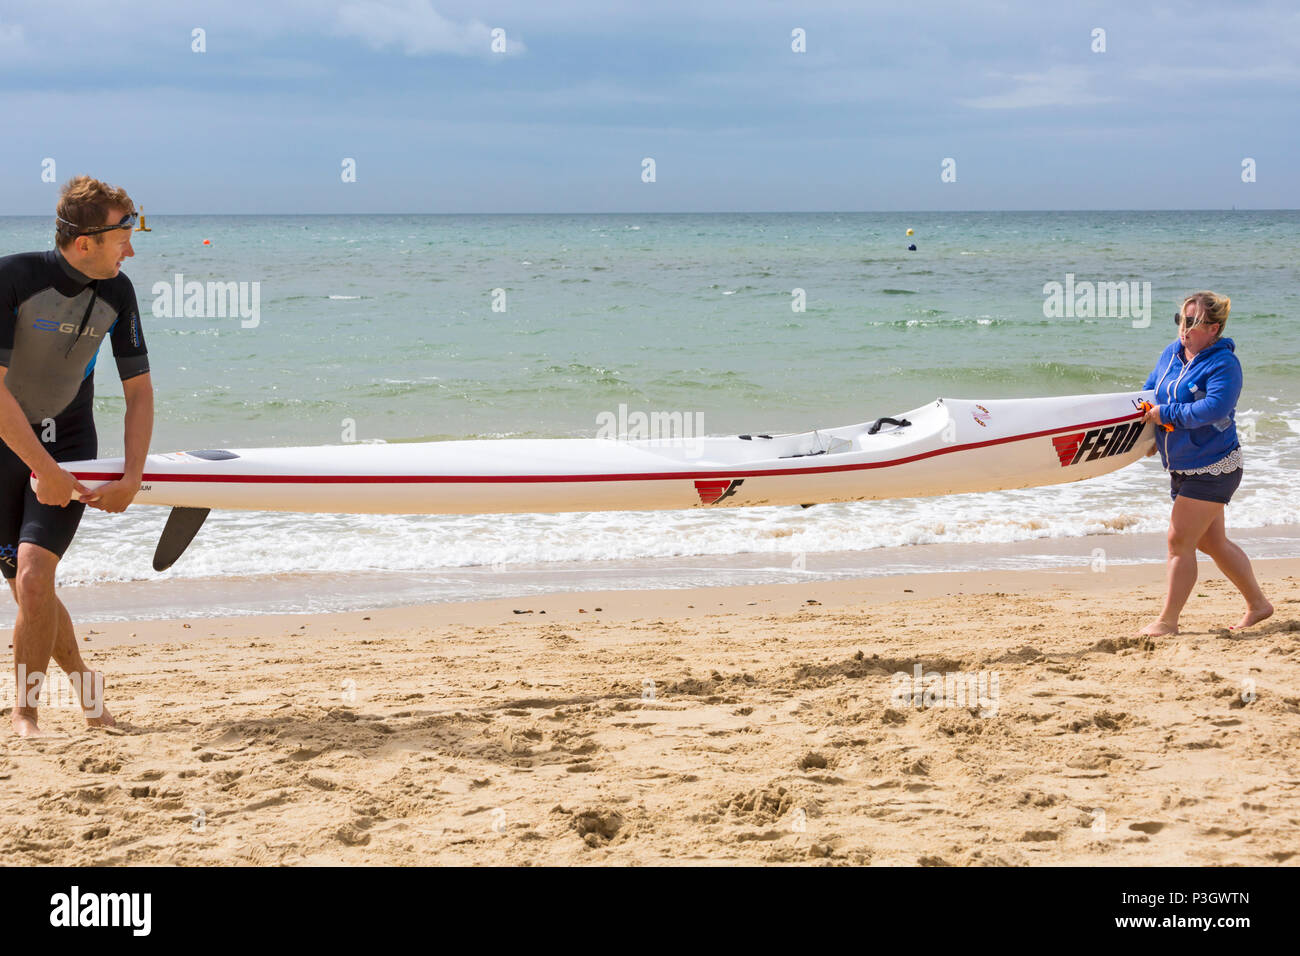 Man and woman carrying a surf ski surfski along seashore at Branksome Chine, Poole, Dorset, England UK in June Stock Photo